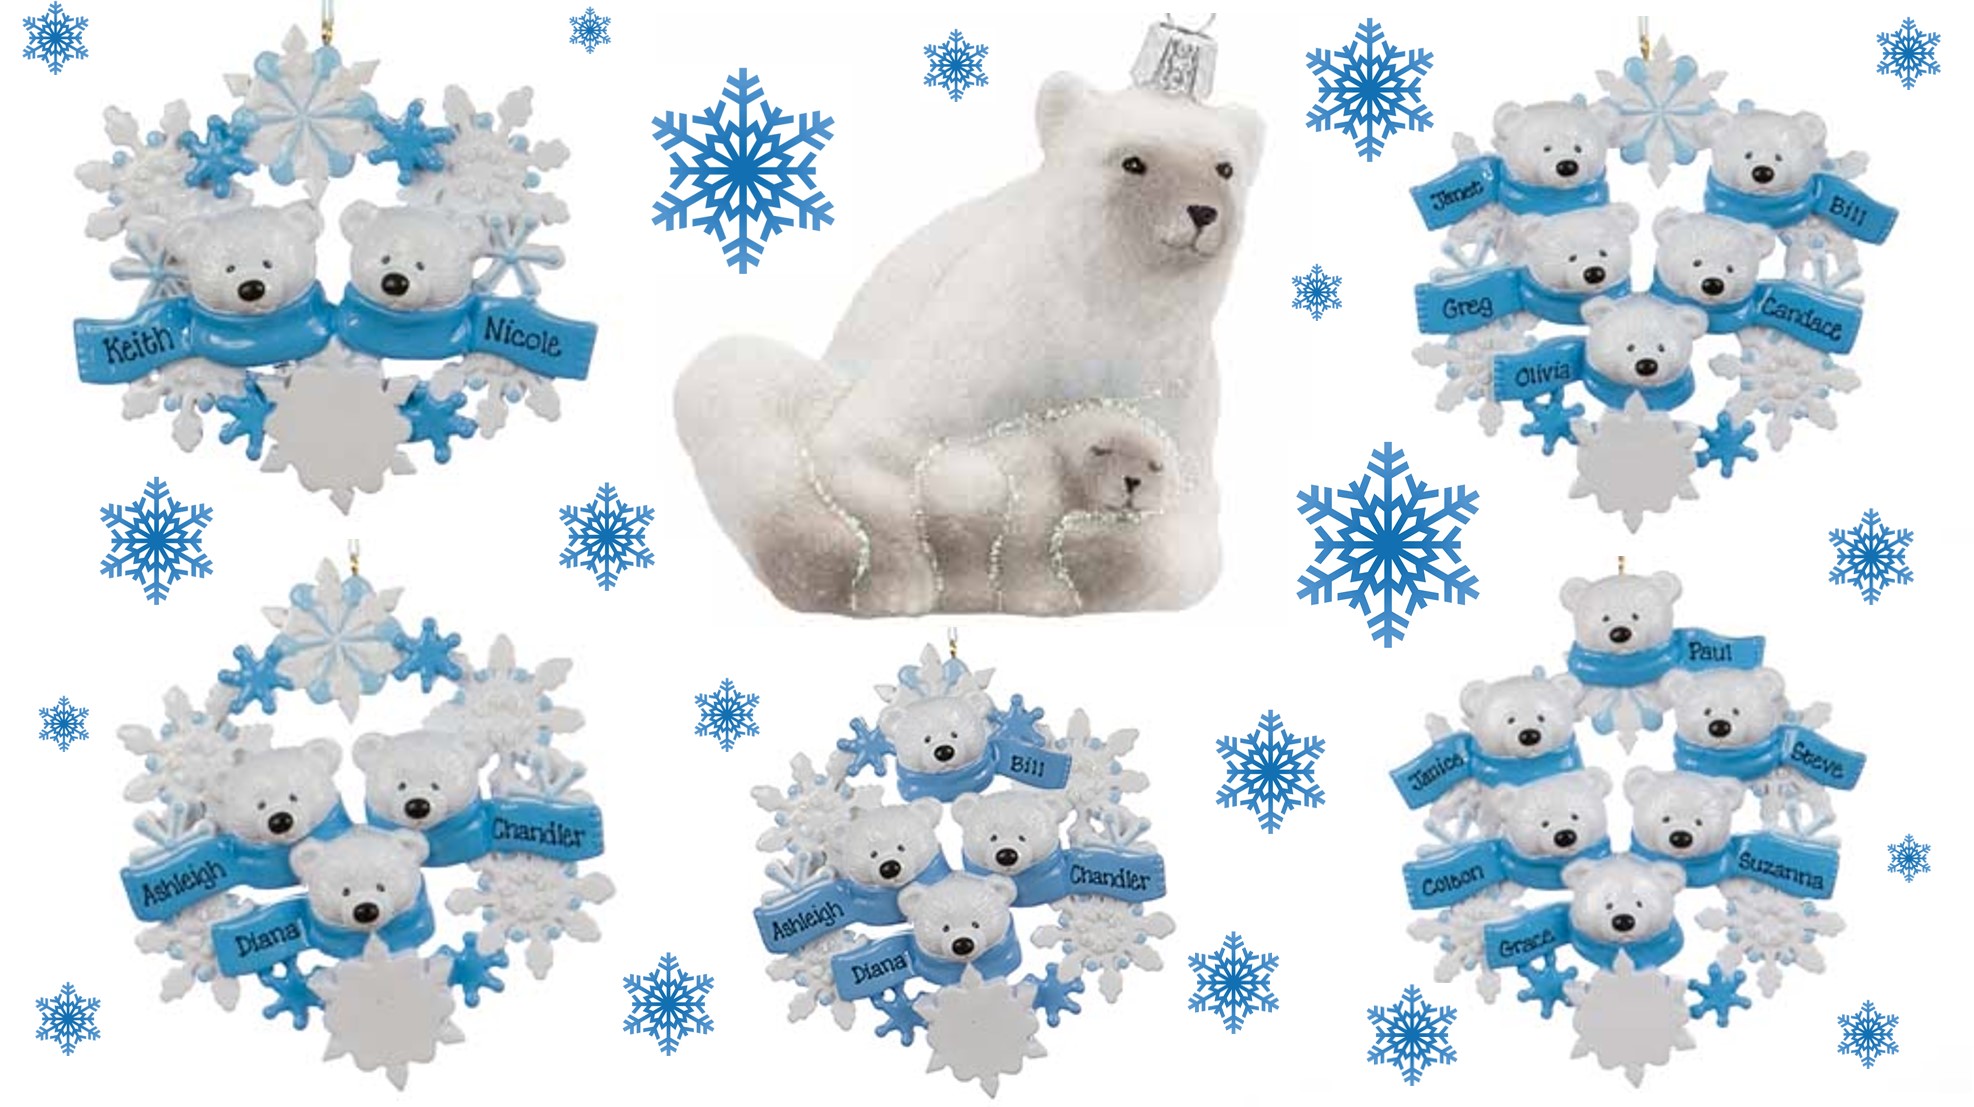 Polar Bear Ornaments that can be found to represent families. | OrnamentShop.com